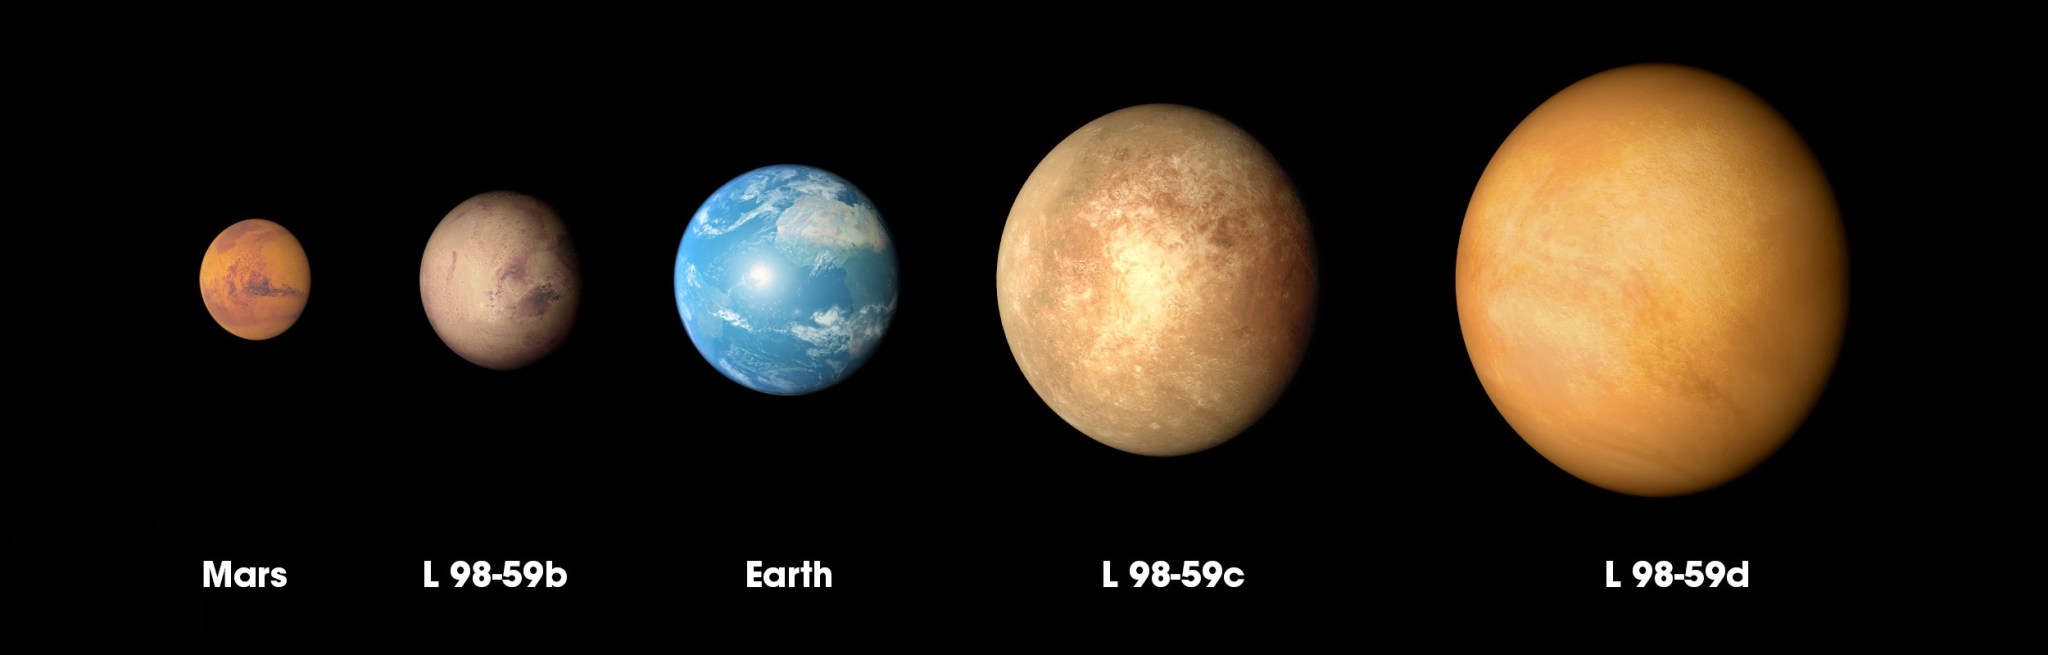 illustration of L98-59 system planets, compared to sizes of Earth and Mars